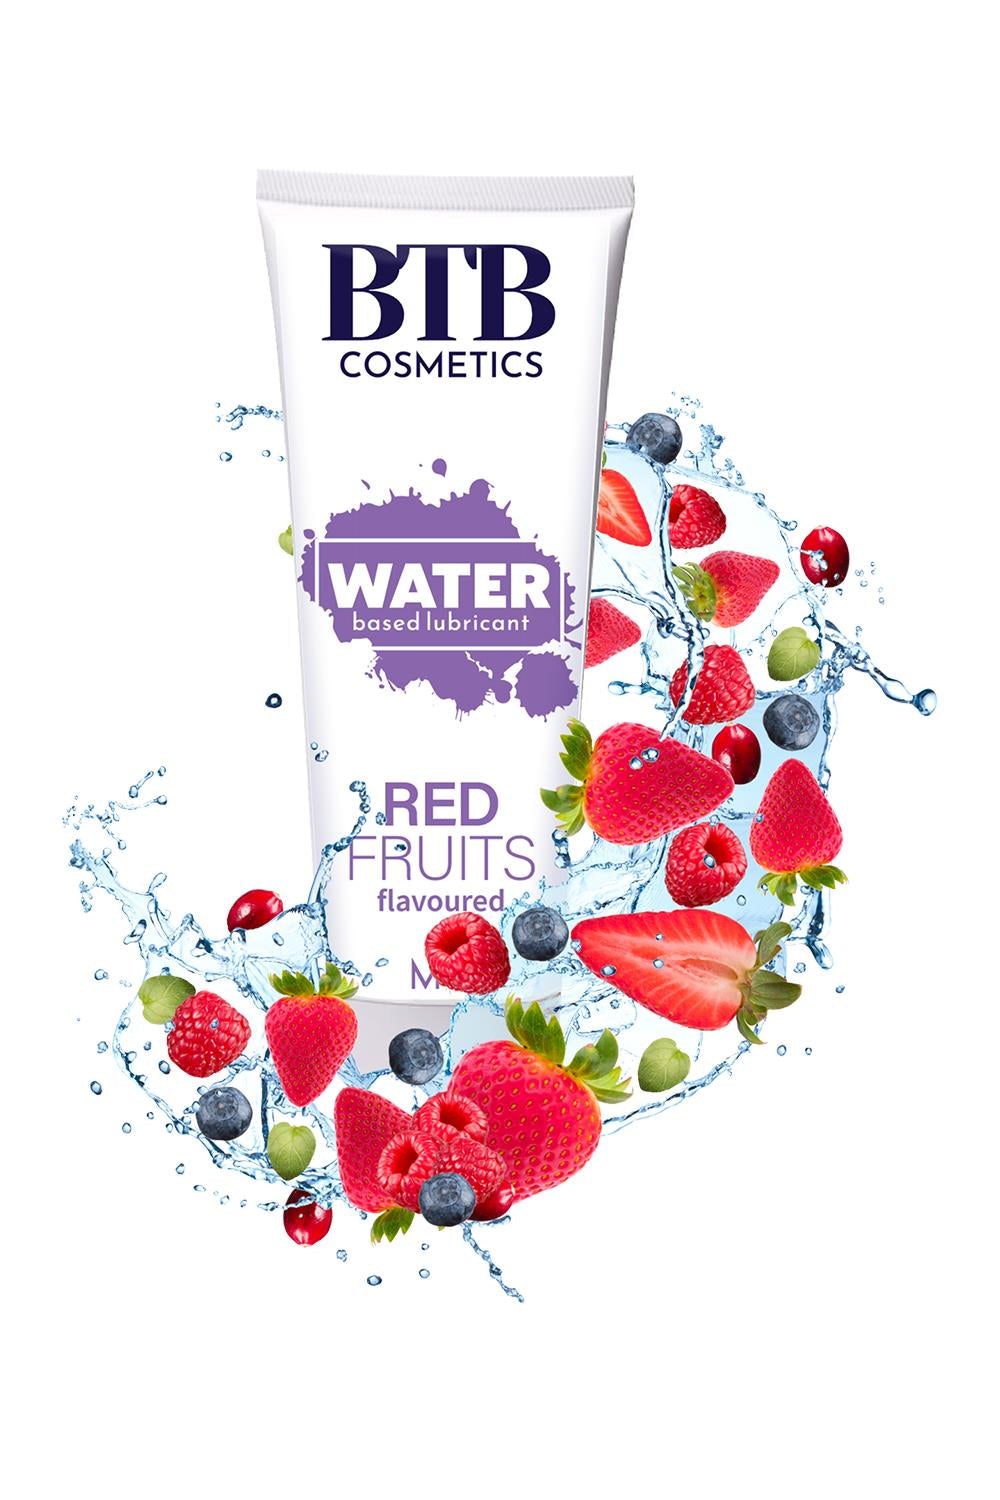 Btb Water Based Flavored Red Fruits Lubricant 100ml